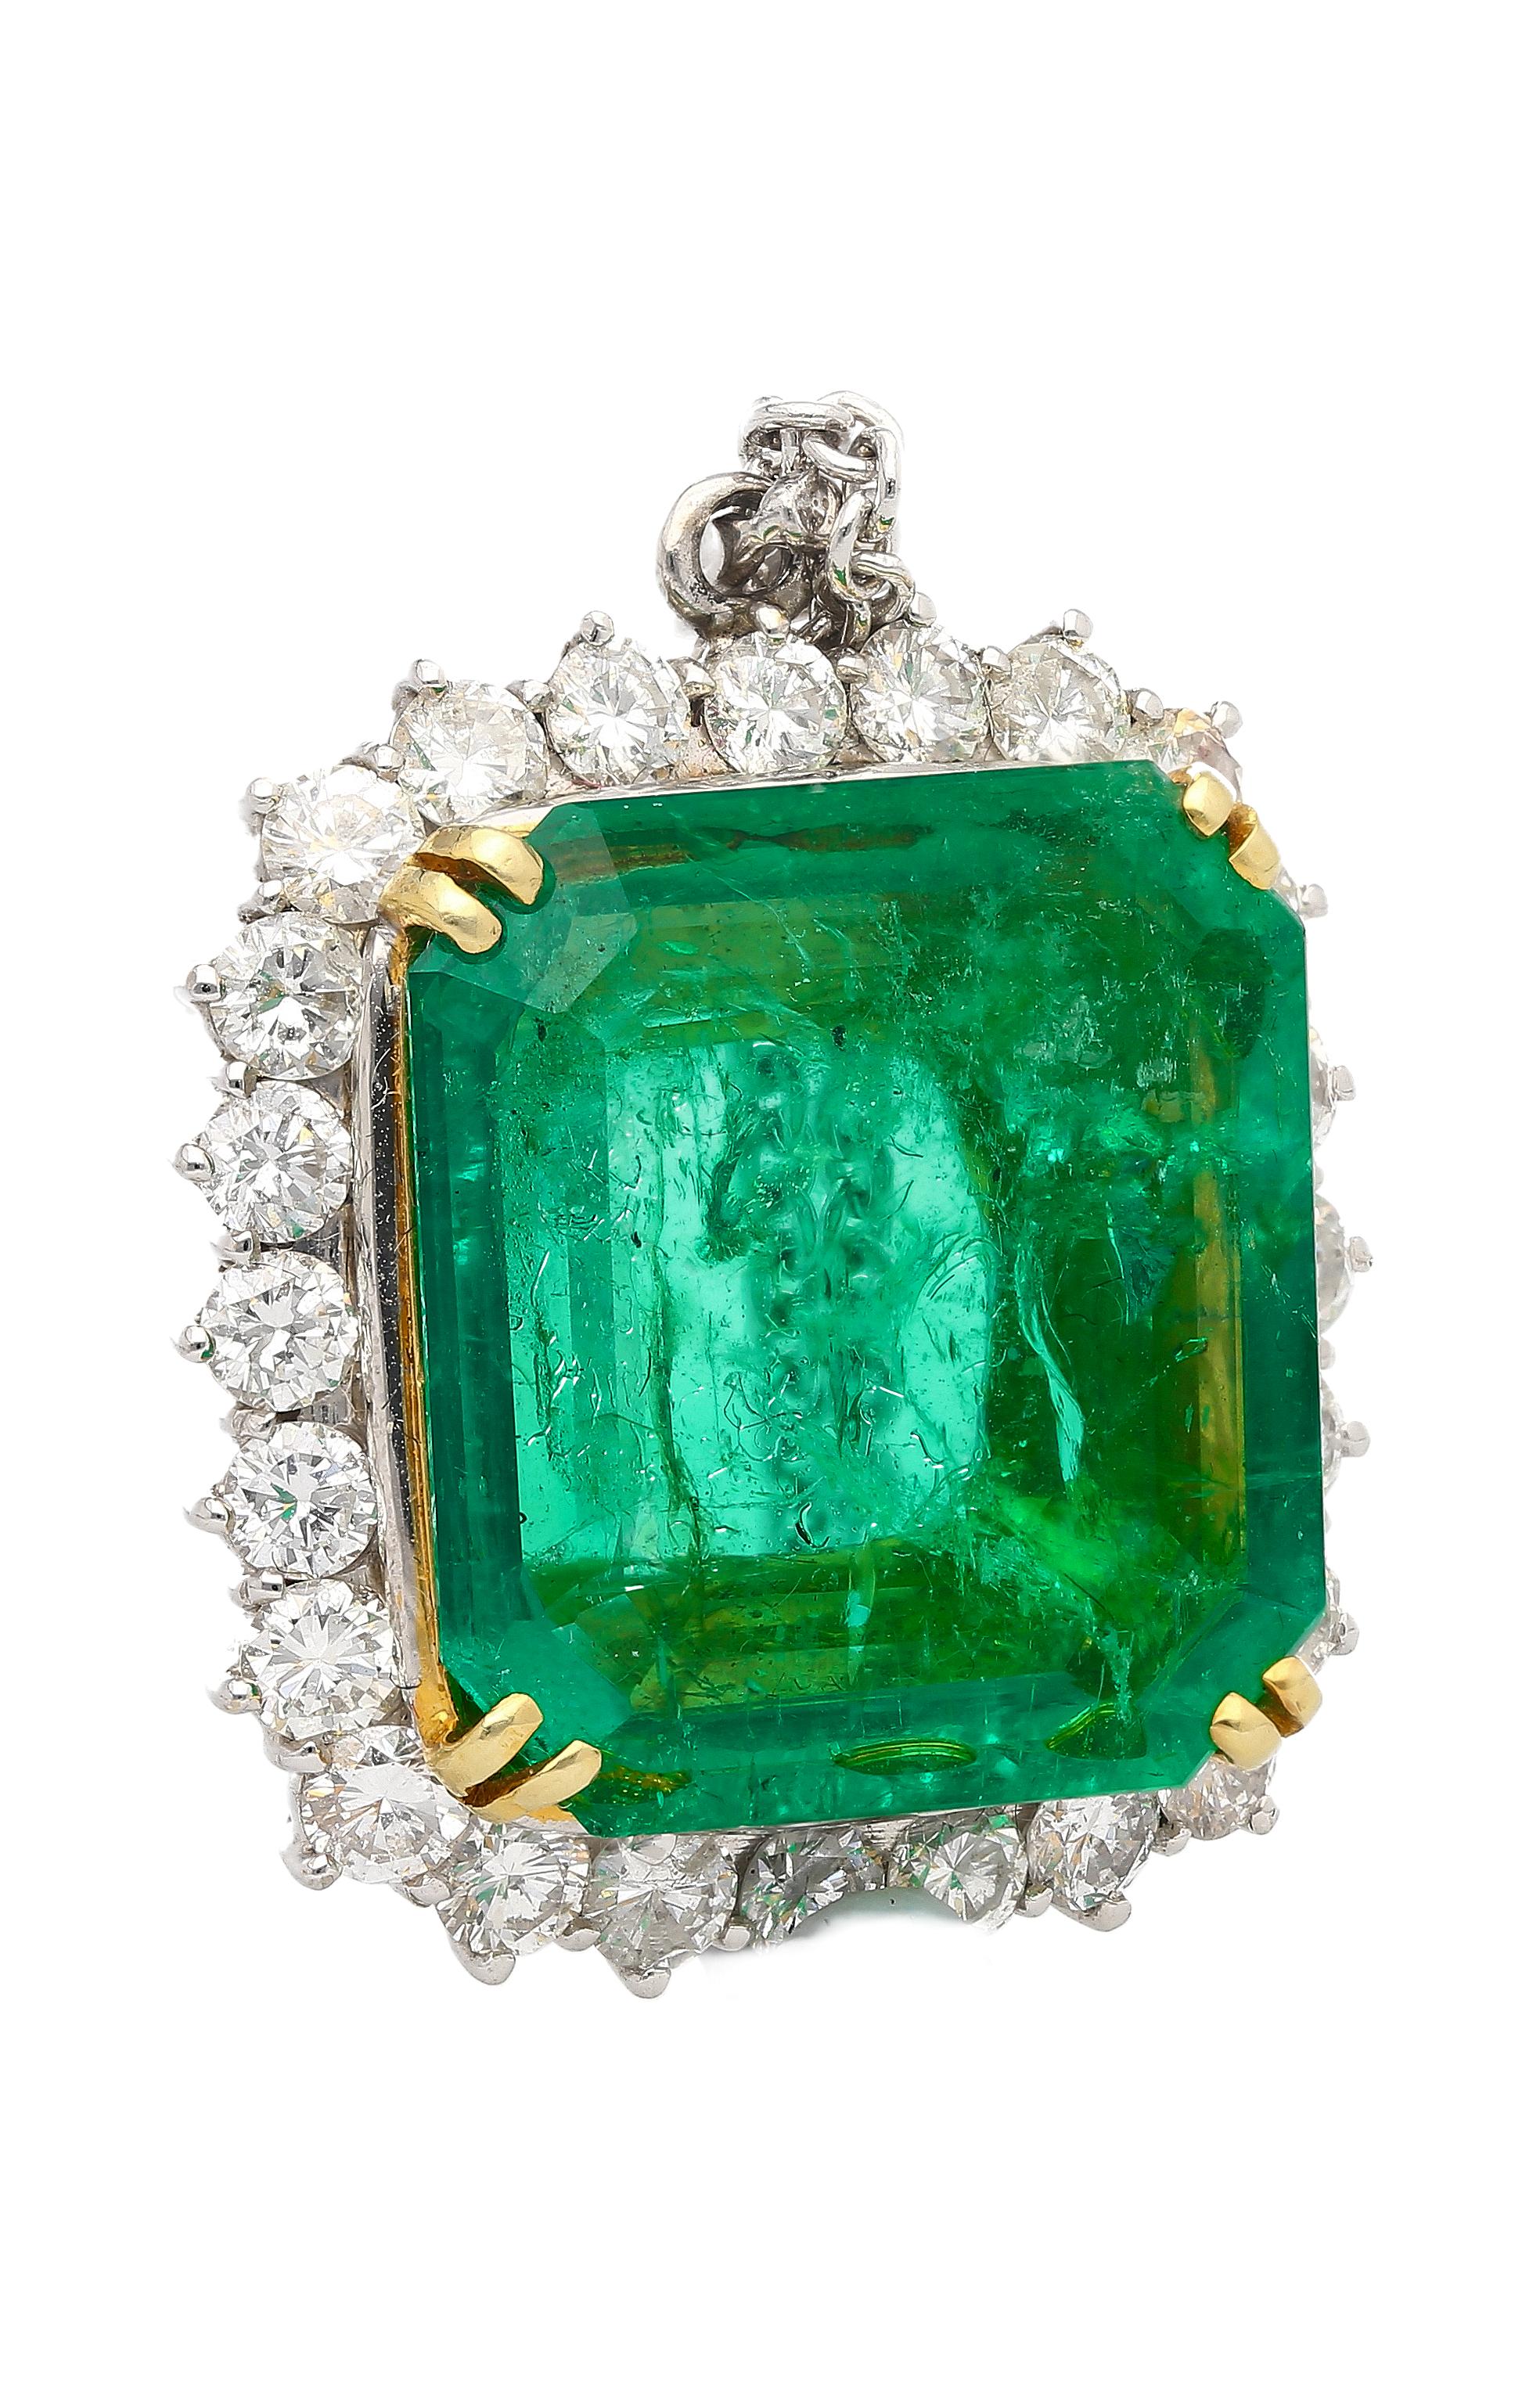 Prepare to be enchanted by the radiance and luster of this pendant necklace. Taking center stage is a 13.49 carat minor oil Colombian Emerald. Square emerald cut with vivid green color, excellent luster, and transparency. Certified by AGL